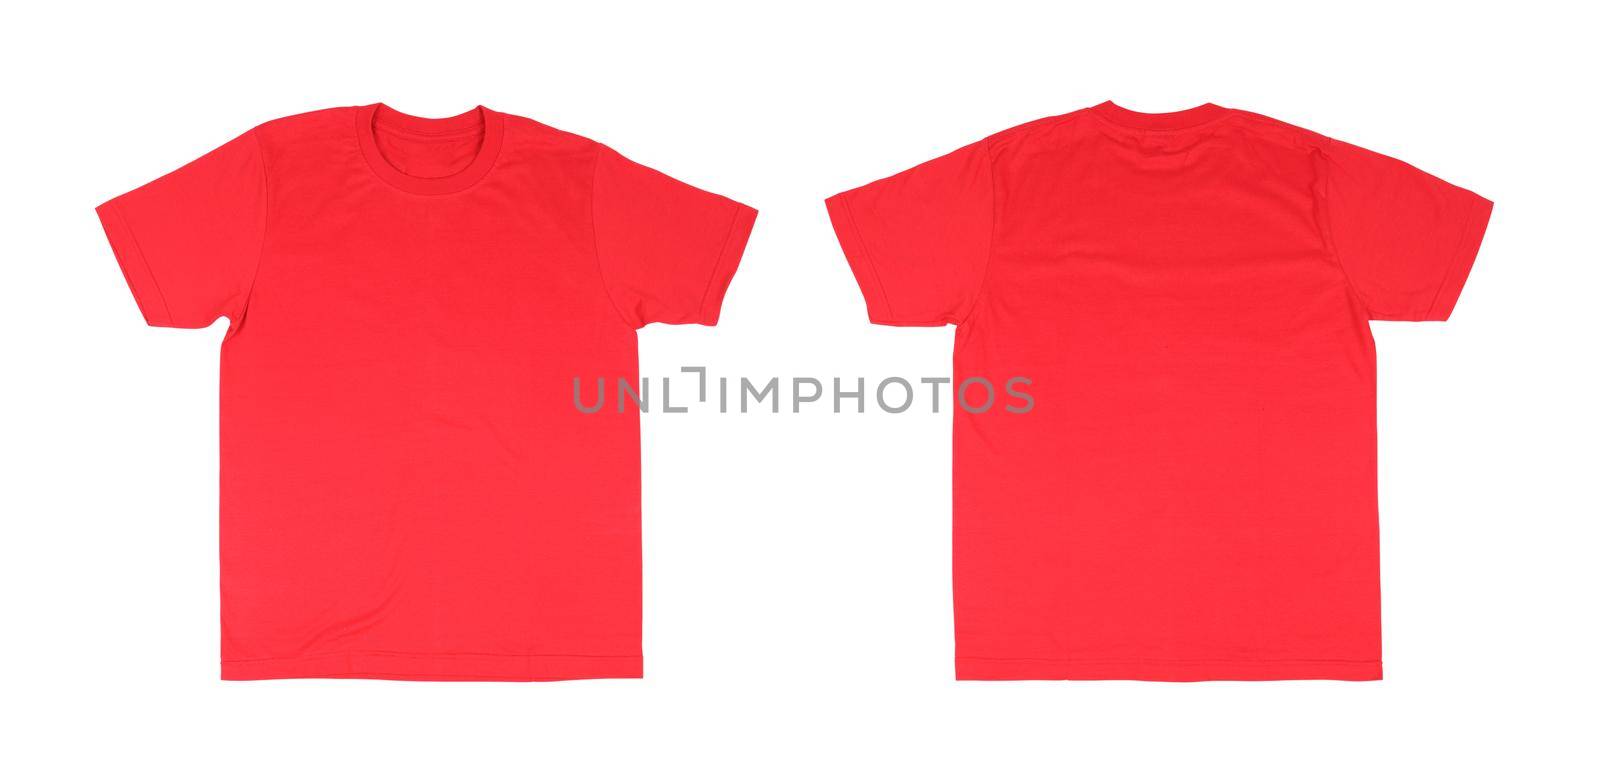 t-shirt template set(front, back) on white background